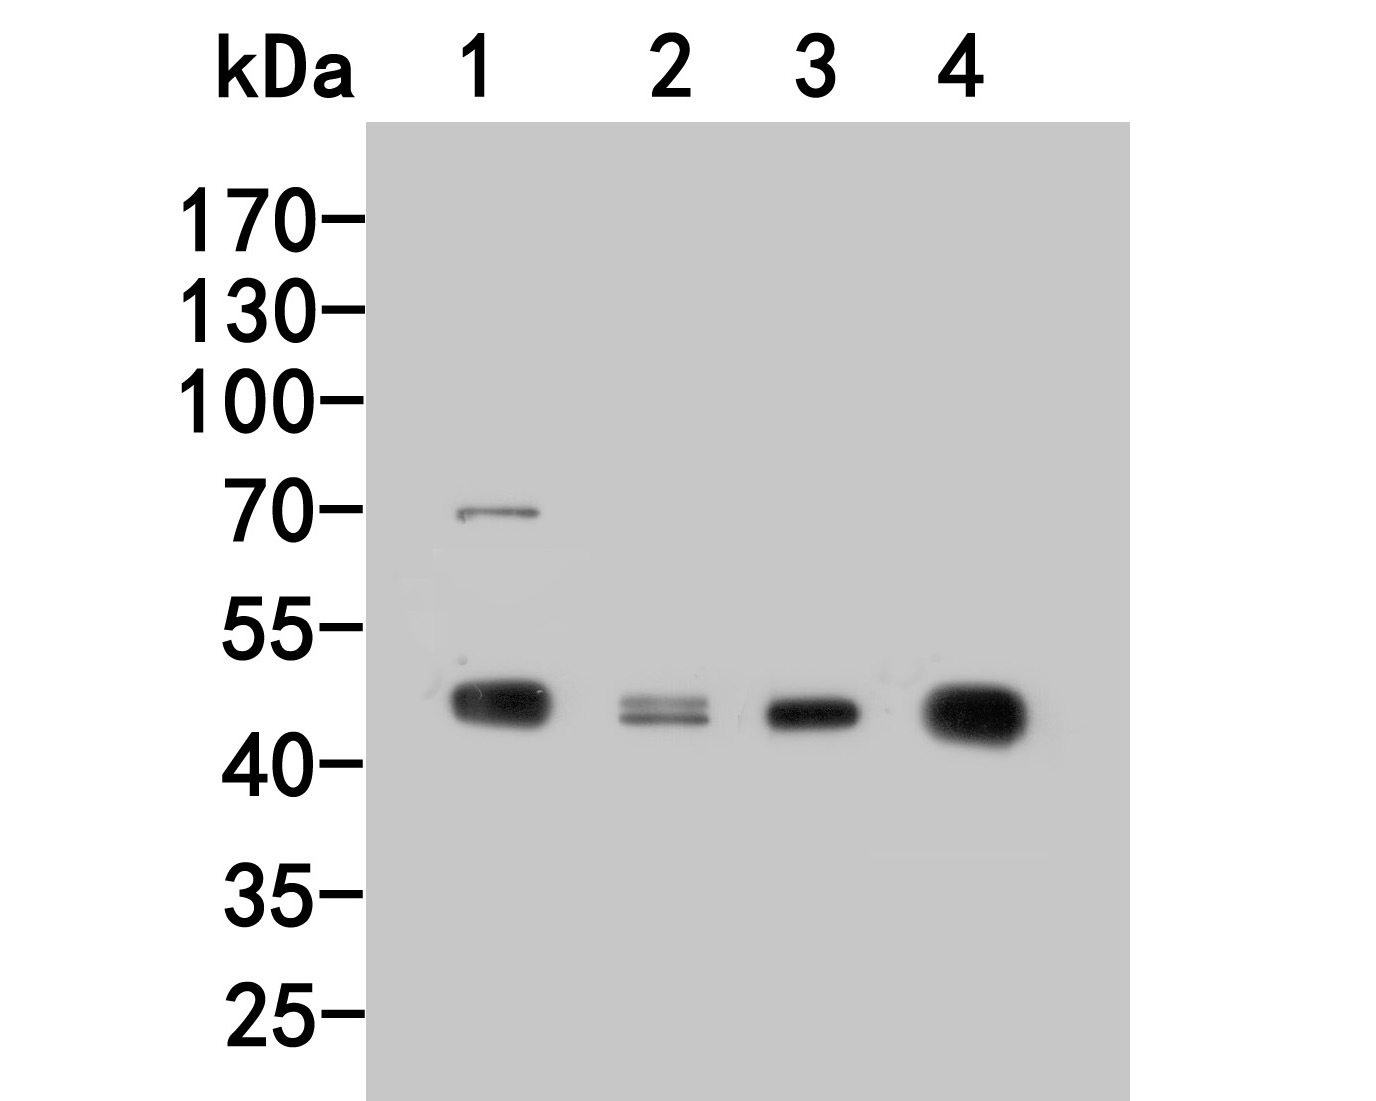 Western blot analysis of PIP5K2 gamma on different lysates. Proteins were transferred to a PVDF membrane and blocked with 5% BSA in PBS for 1 hour at room temperature. The primary antibody (HA500139, 1/1,000) was used in 5% BSA at room temperature for 2 hours. Goat Anti-Rabbit IgG - HRP Secondary Antibody (HA1001) at 1:200,000 dilution was used for 1 hour at room temperature.<br />
Positive control: <br />
Lane 1: MCF-7 cell lysate<br />
Lane 2: A549 cell lysate<br />
Lane 3: Rat cerebellum tissue lysate<br />
Lane 4: Mouse brain tissue lysate